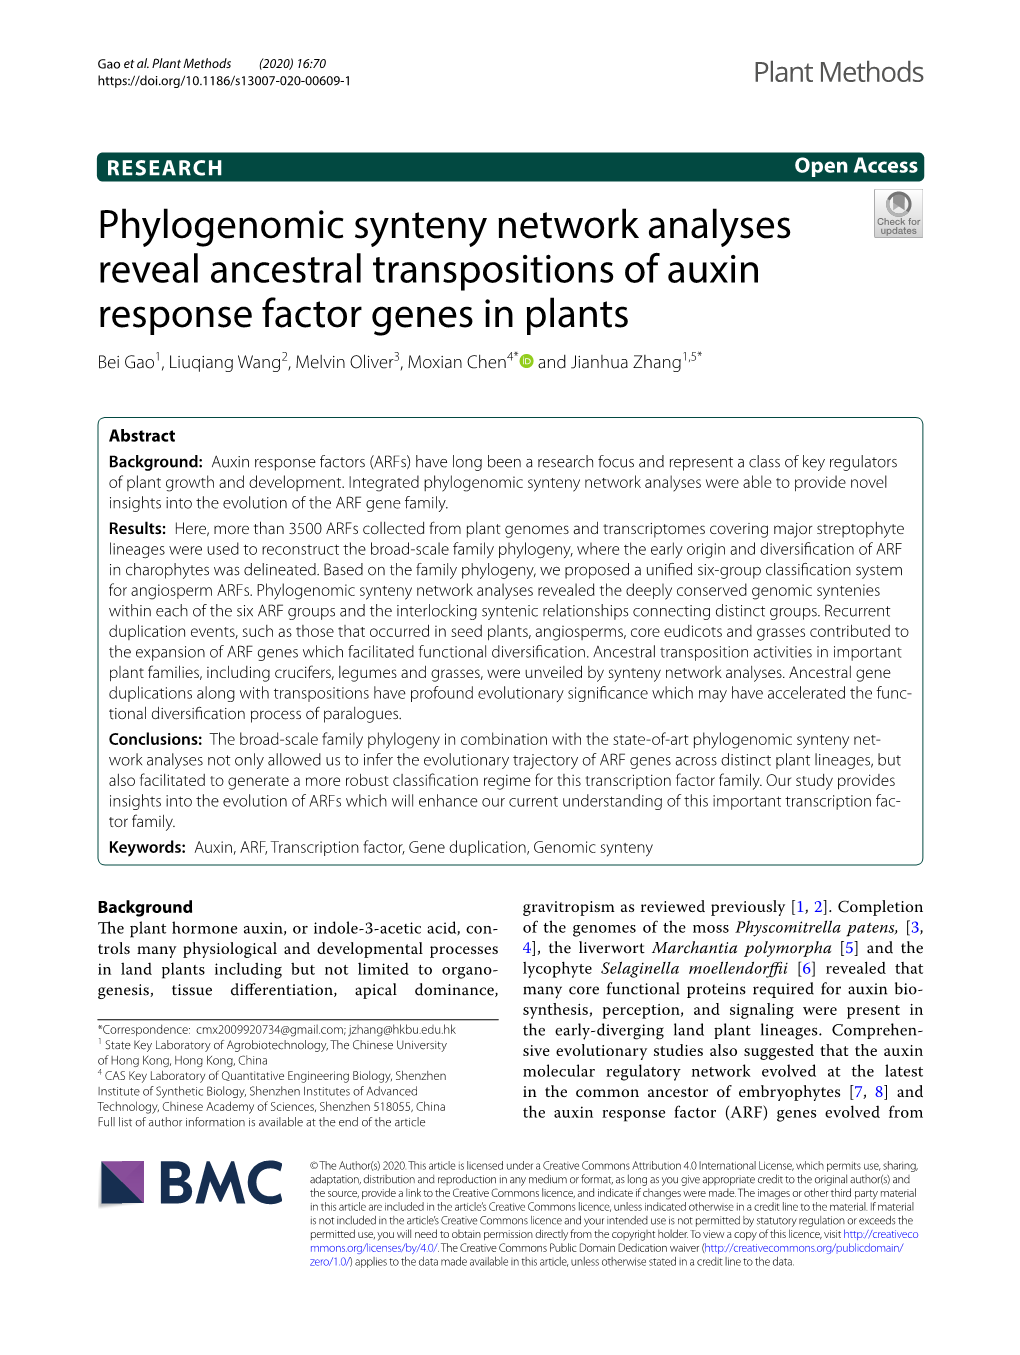 Phylogenomic Synteny Network Analyses Reveal Ancestral